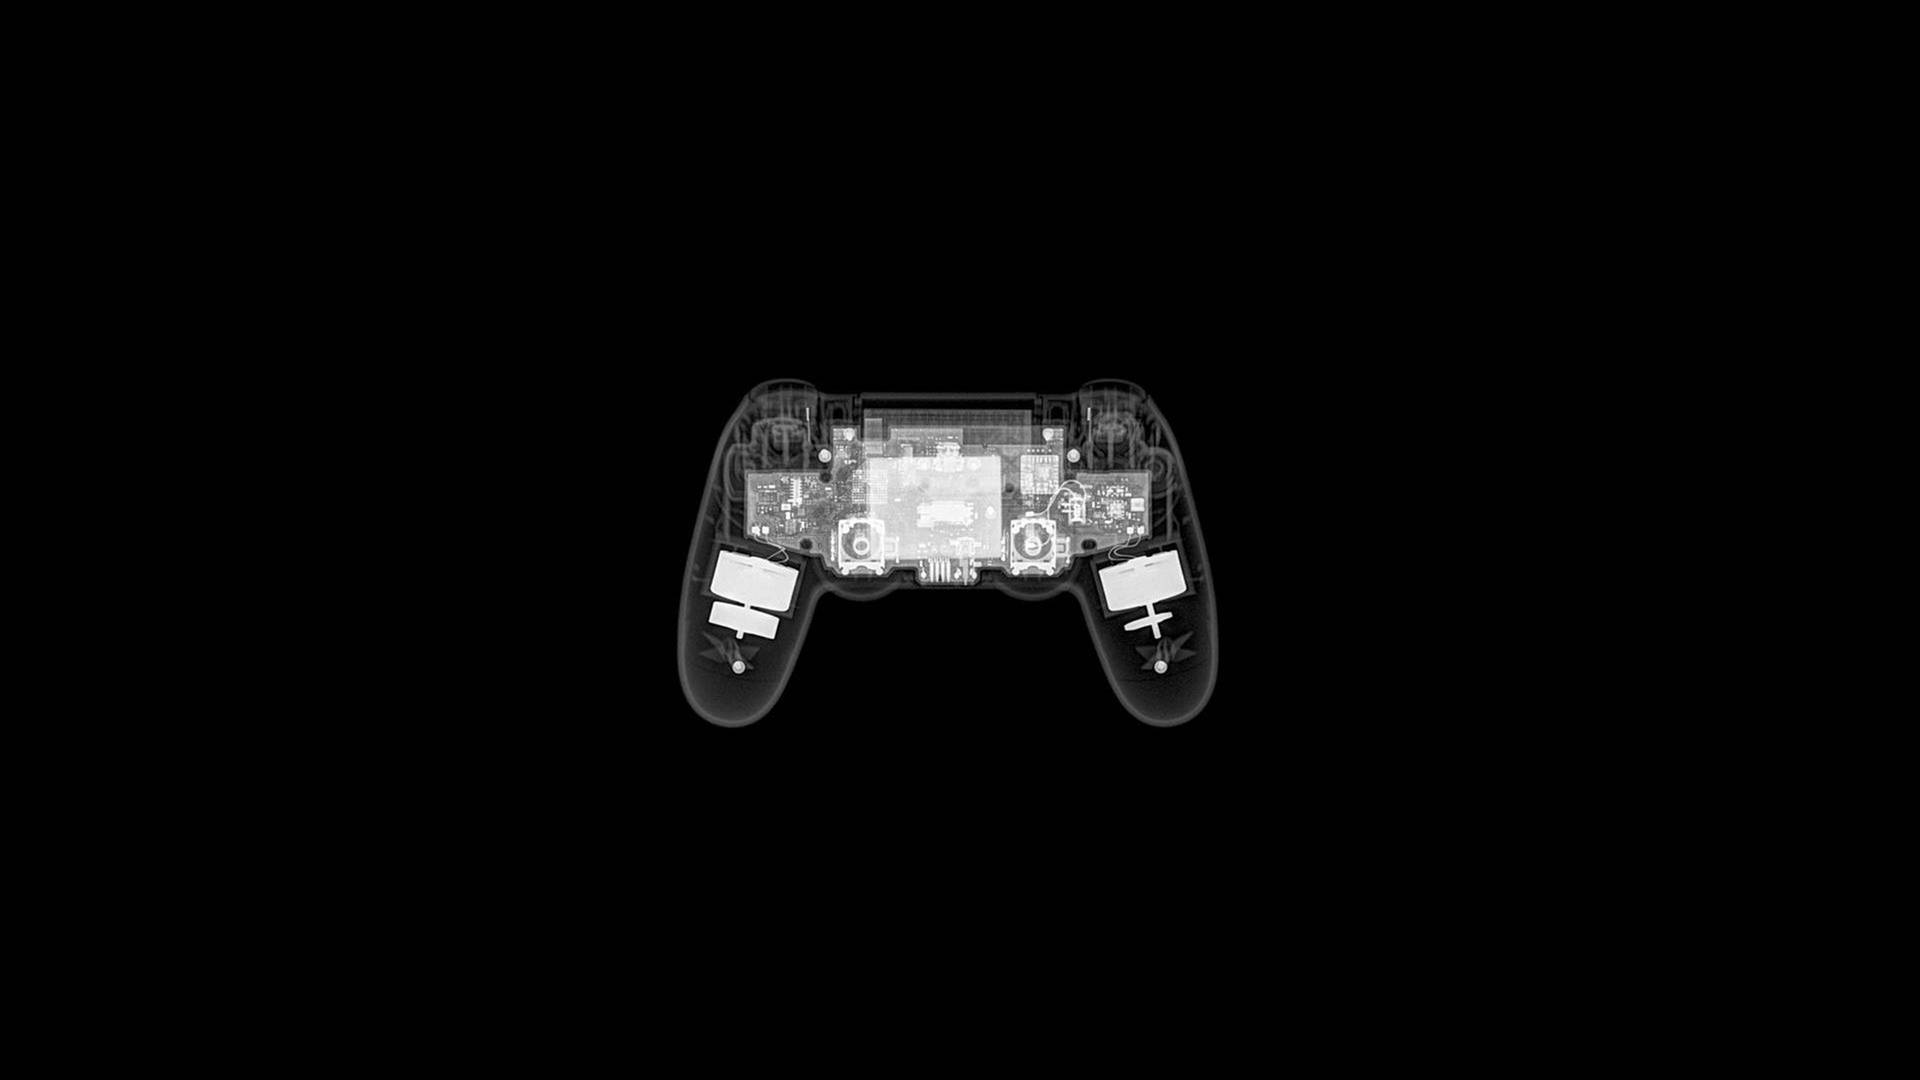 Xray Image Of A 4k Ps4 Controller Background